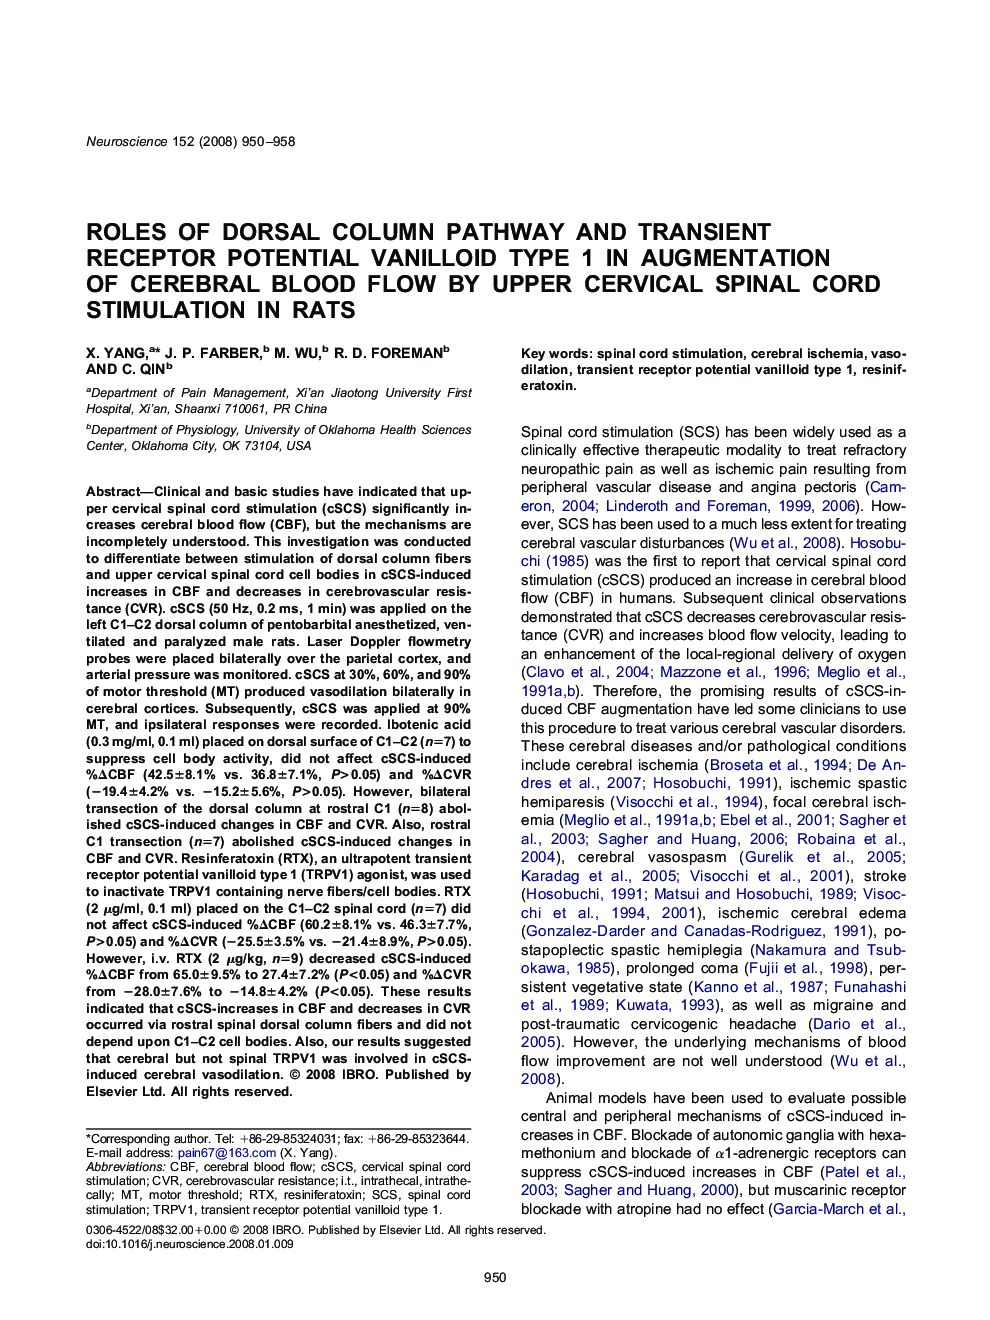 Roles of dorsal column pathway and transient receptor potential vanilloid type 1 in augmentation of cerebral blood flow by upper cervical spinal cord stimulation in rats